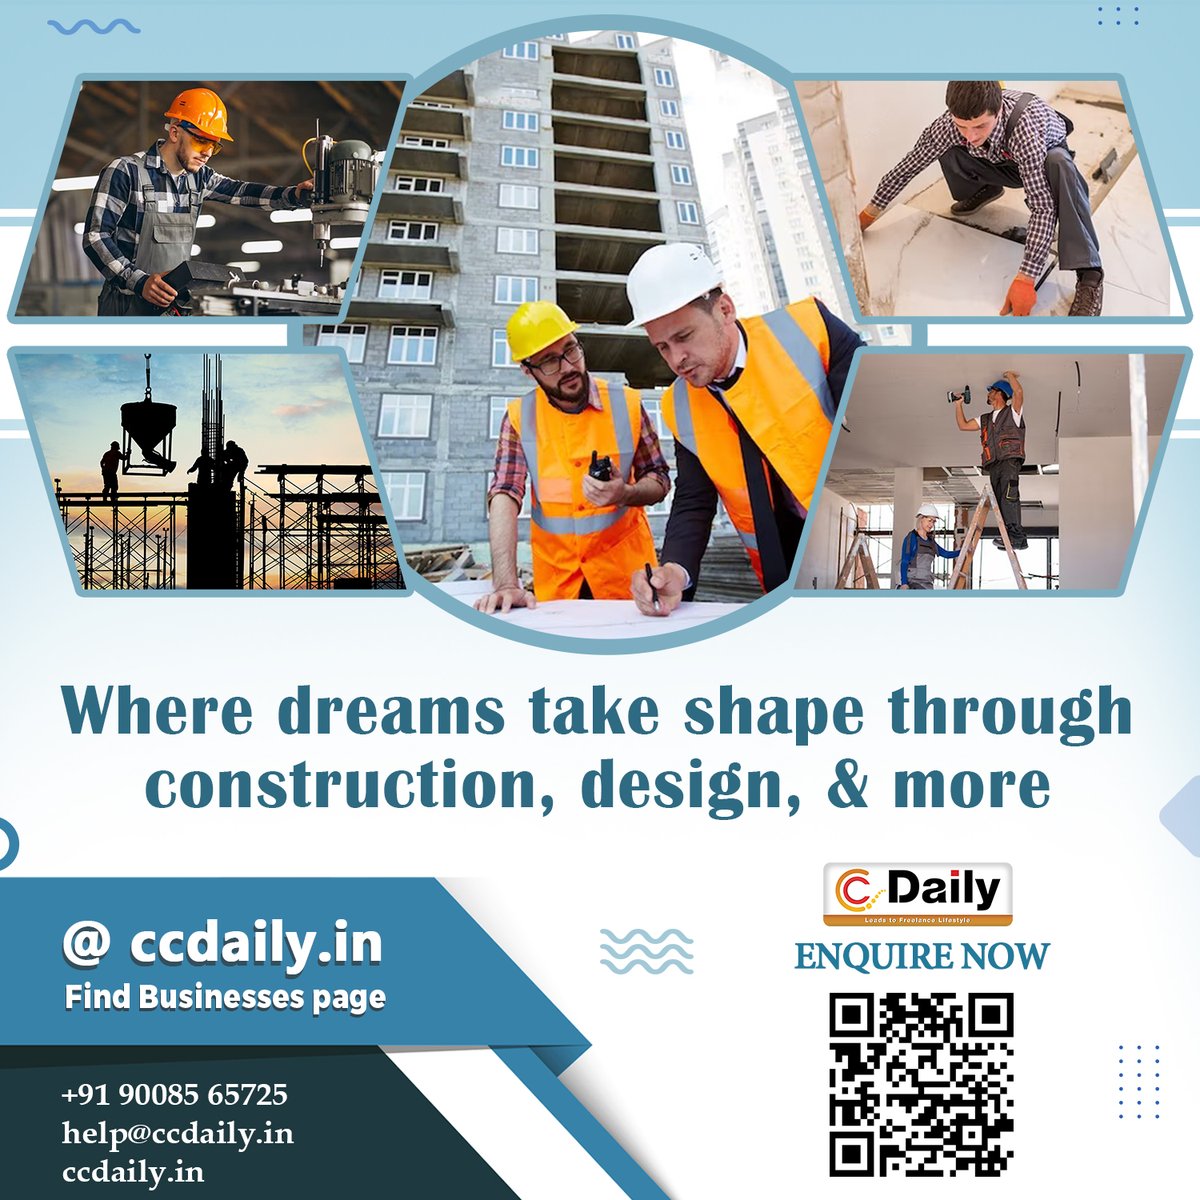 Crafting Dreams into Reality Through Construction, Design, and More

#IbadatGroup #Construction #InteriorDesign #Fabrication #Plumbing #Painting #Renovation #FunctionalSpaces #TopNotchQuality #VisionToLife #DreamsToReality #DesigningFutures #RedefiningSpaces #SolutionProvider